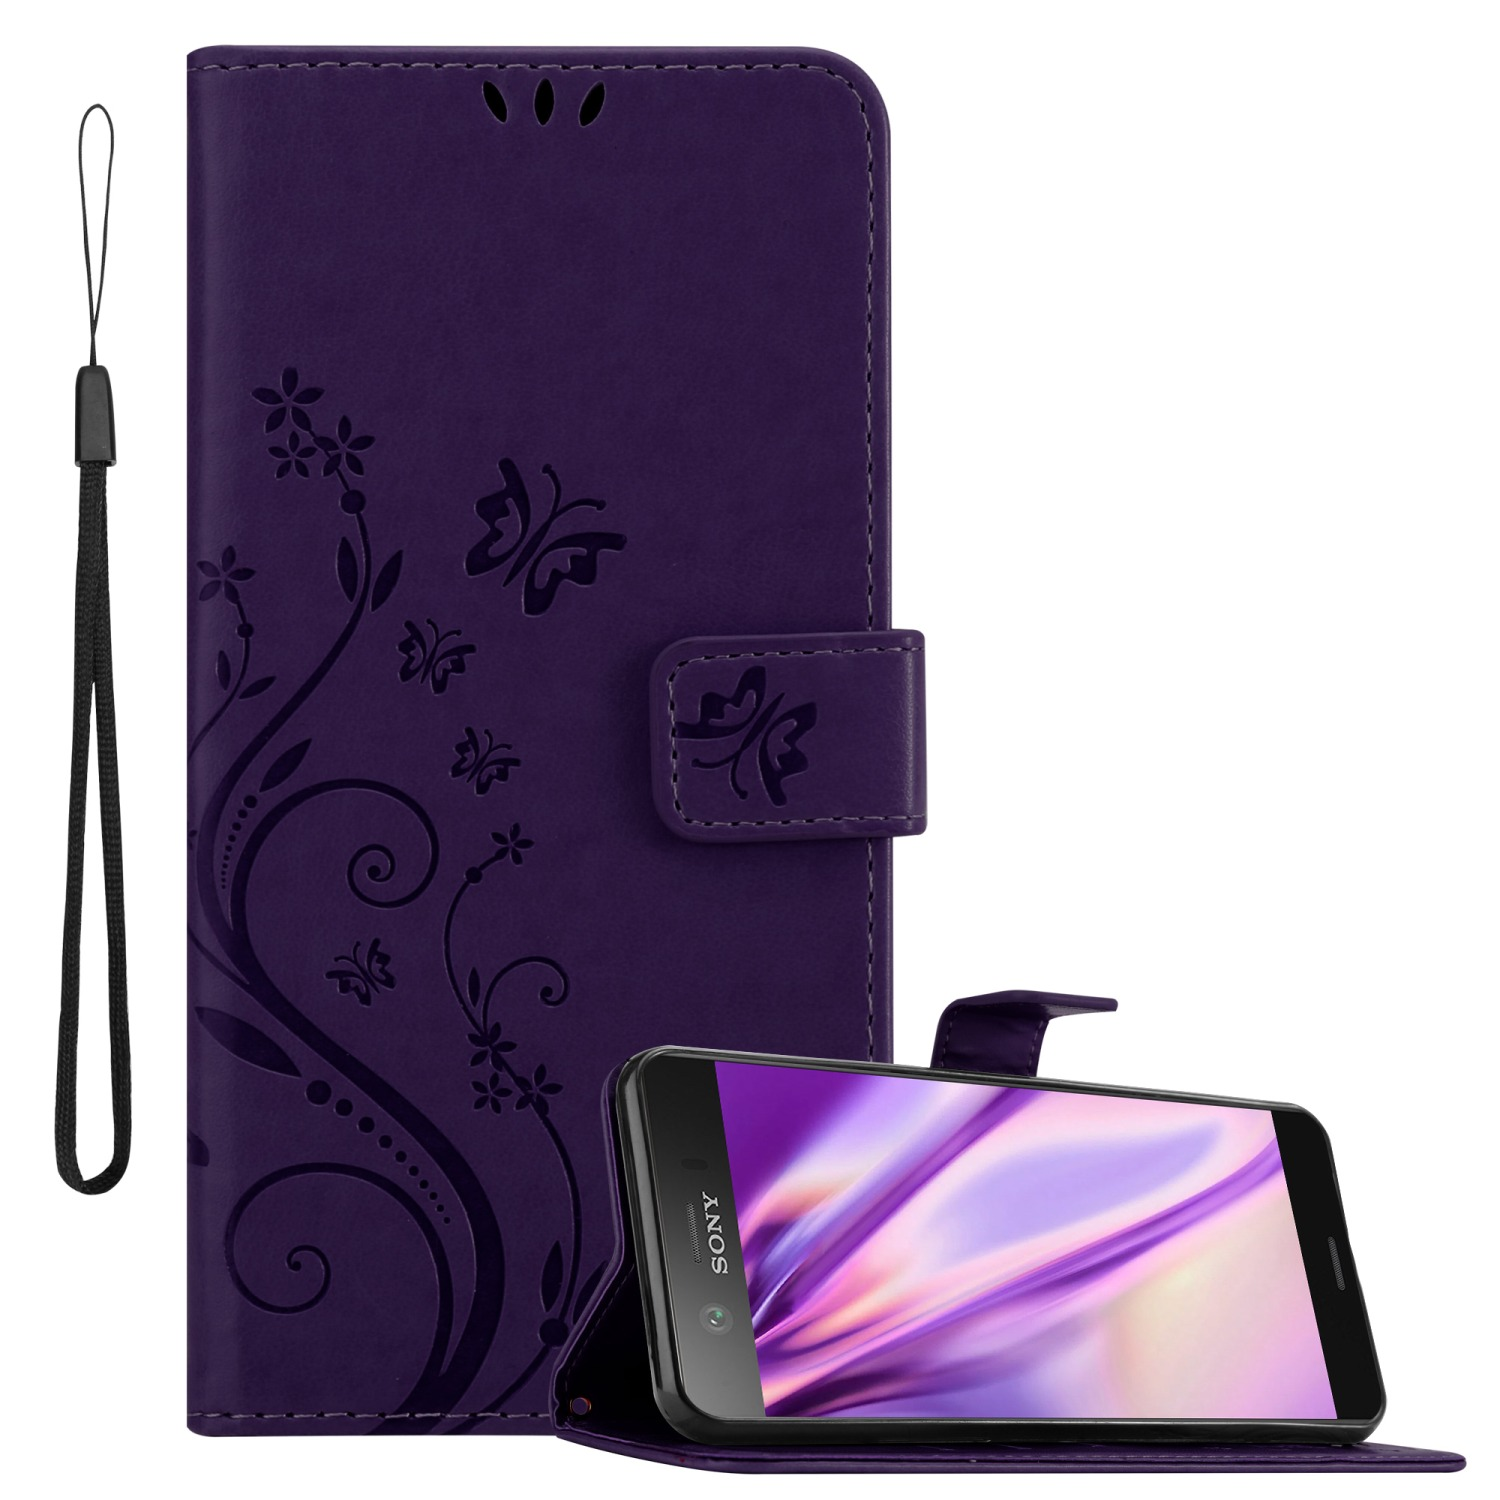 Hülle Sony, Muster DUNKEL Xperia Bookcover, COMPACT, Case, XZ1 CADORABO Flower FLORAL Blumen LILA